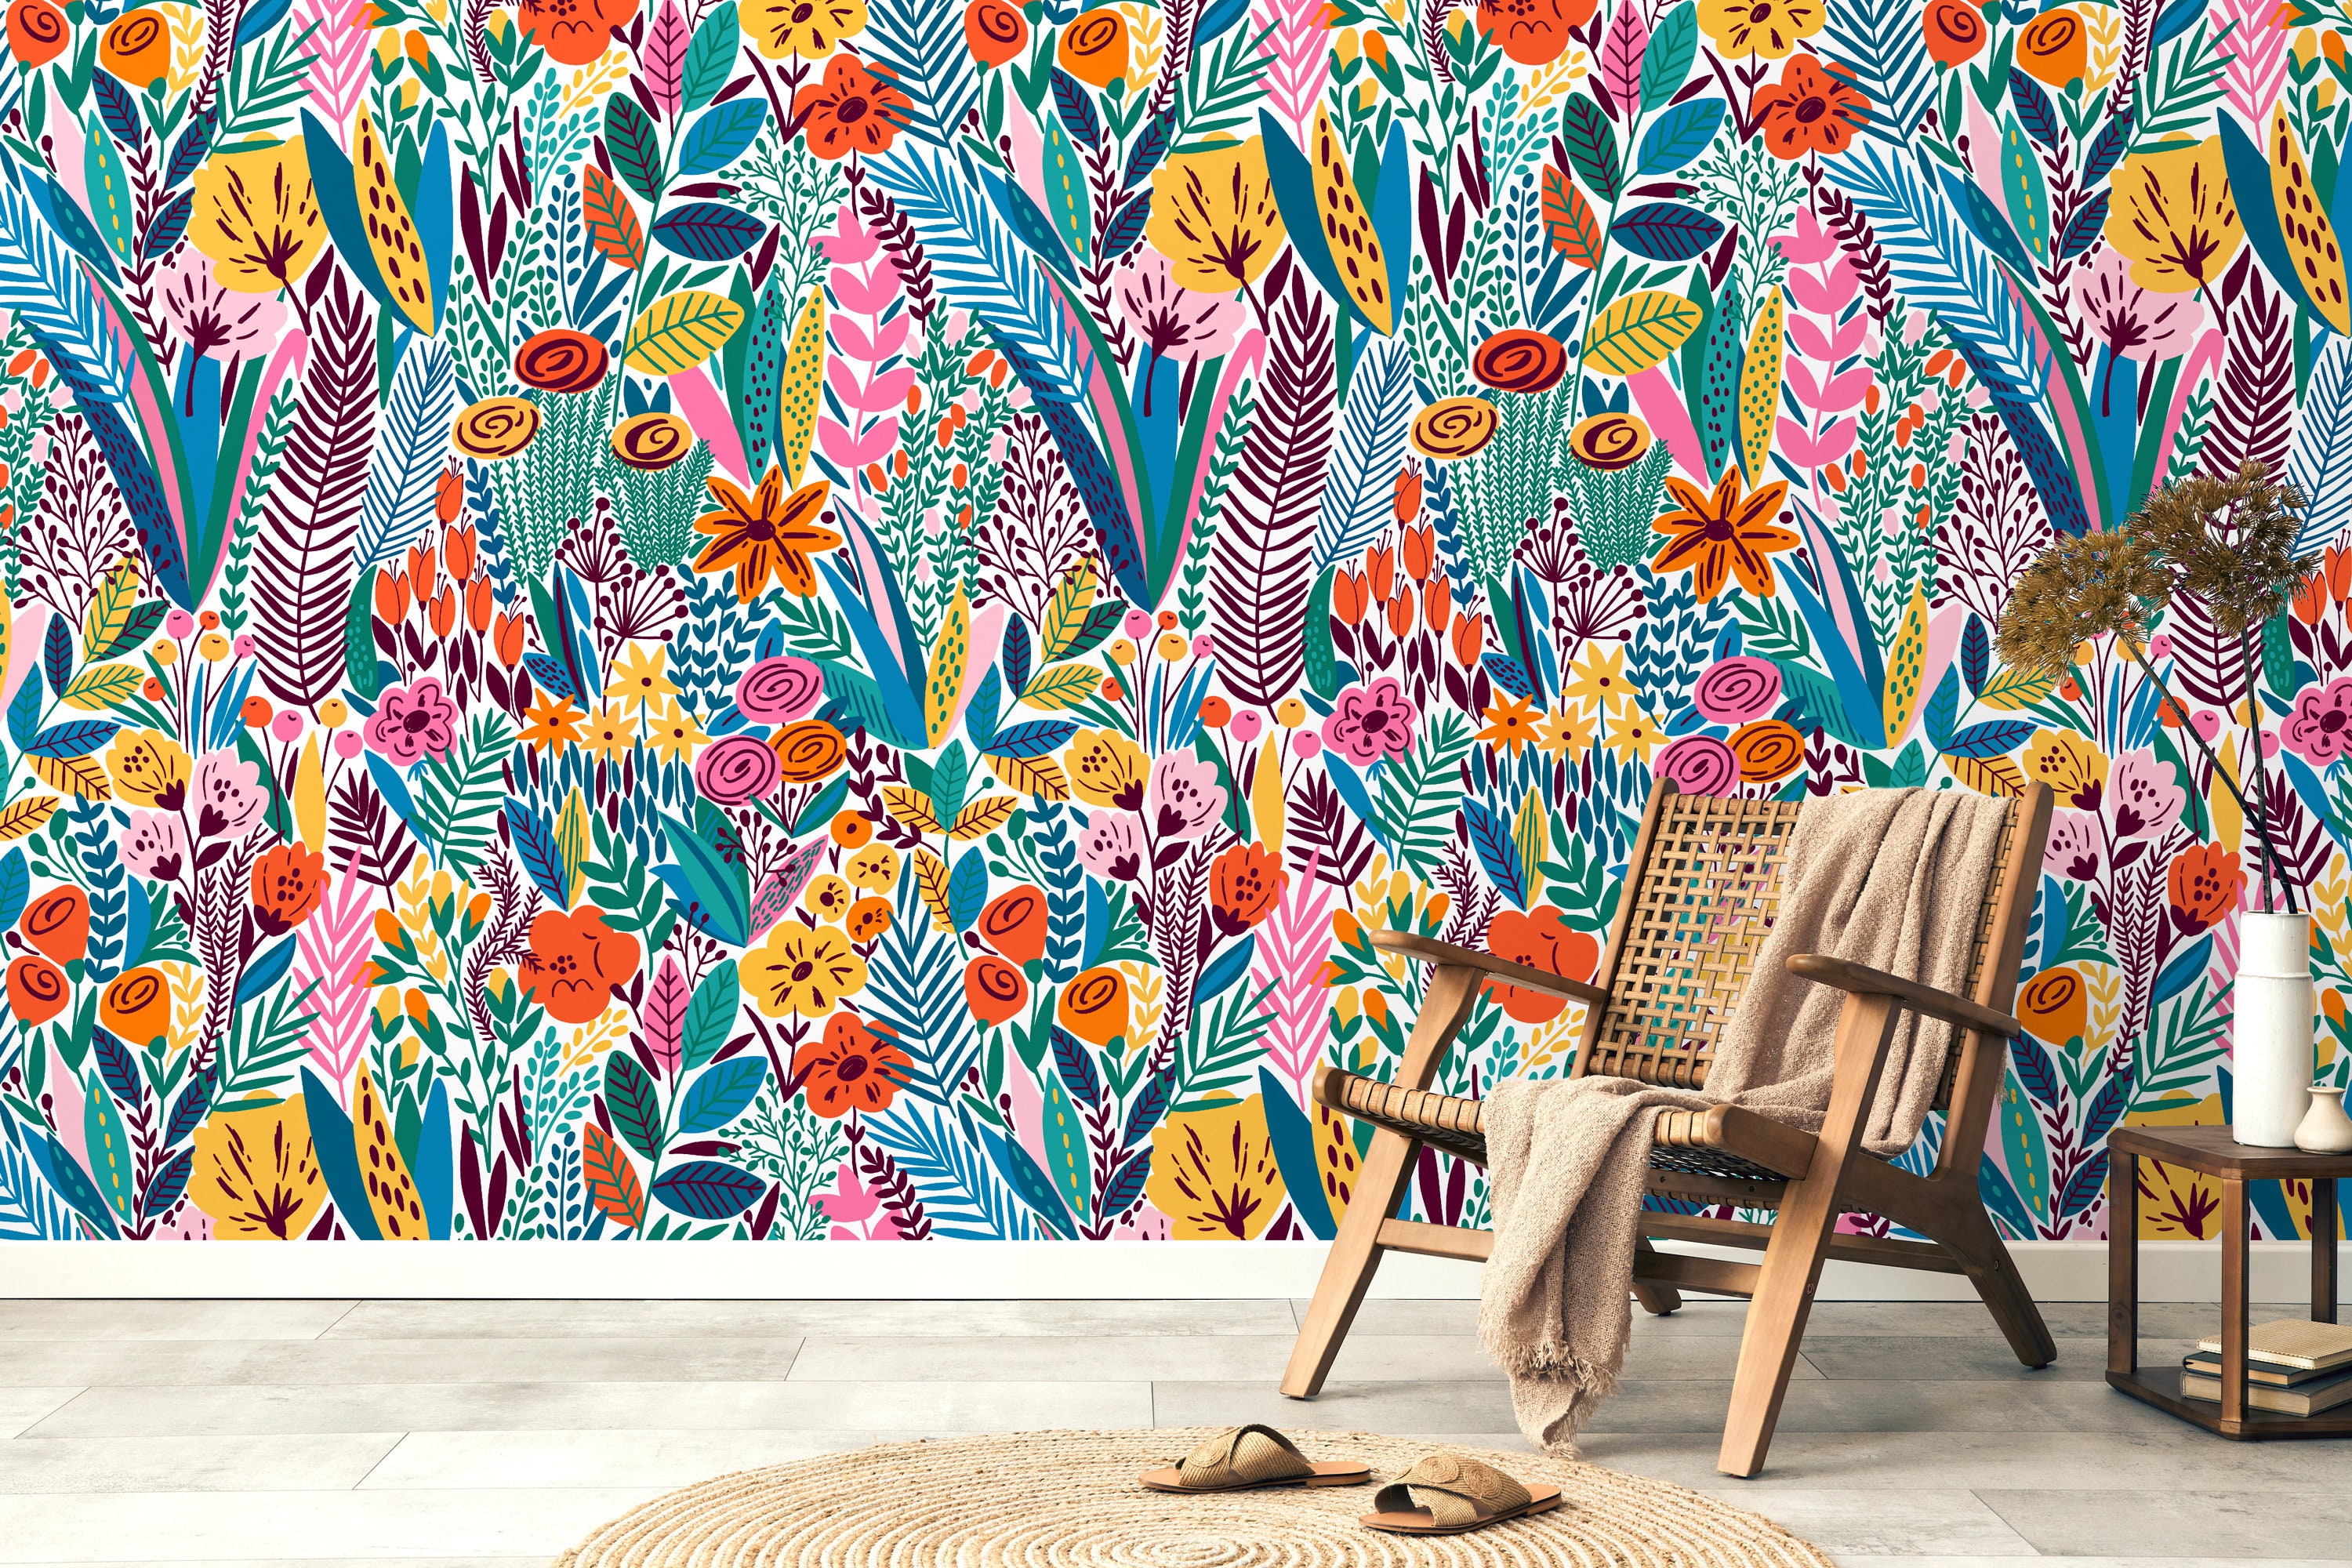 Elite Floral Wallpaper for walls for Transform the Vibe